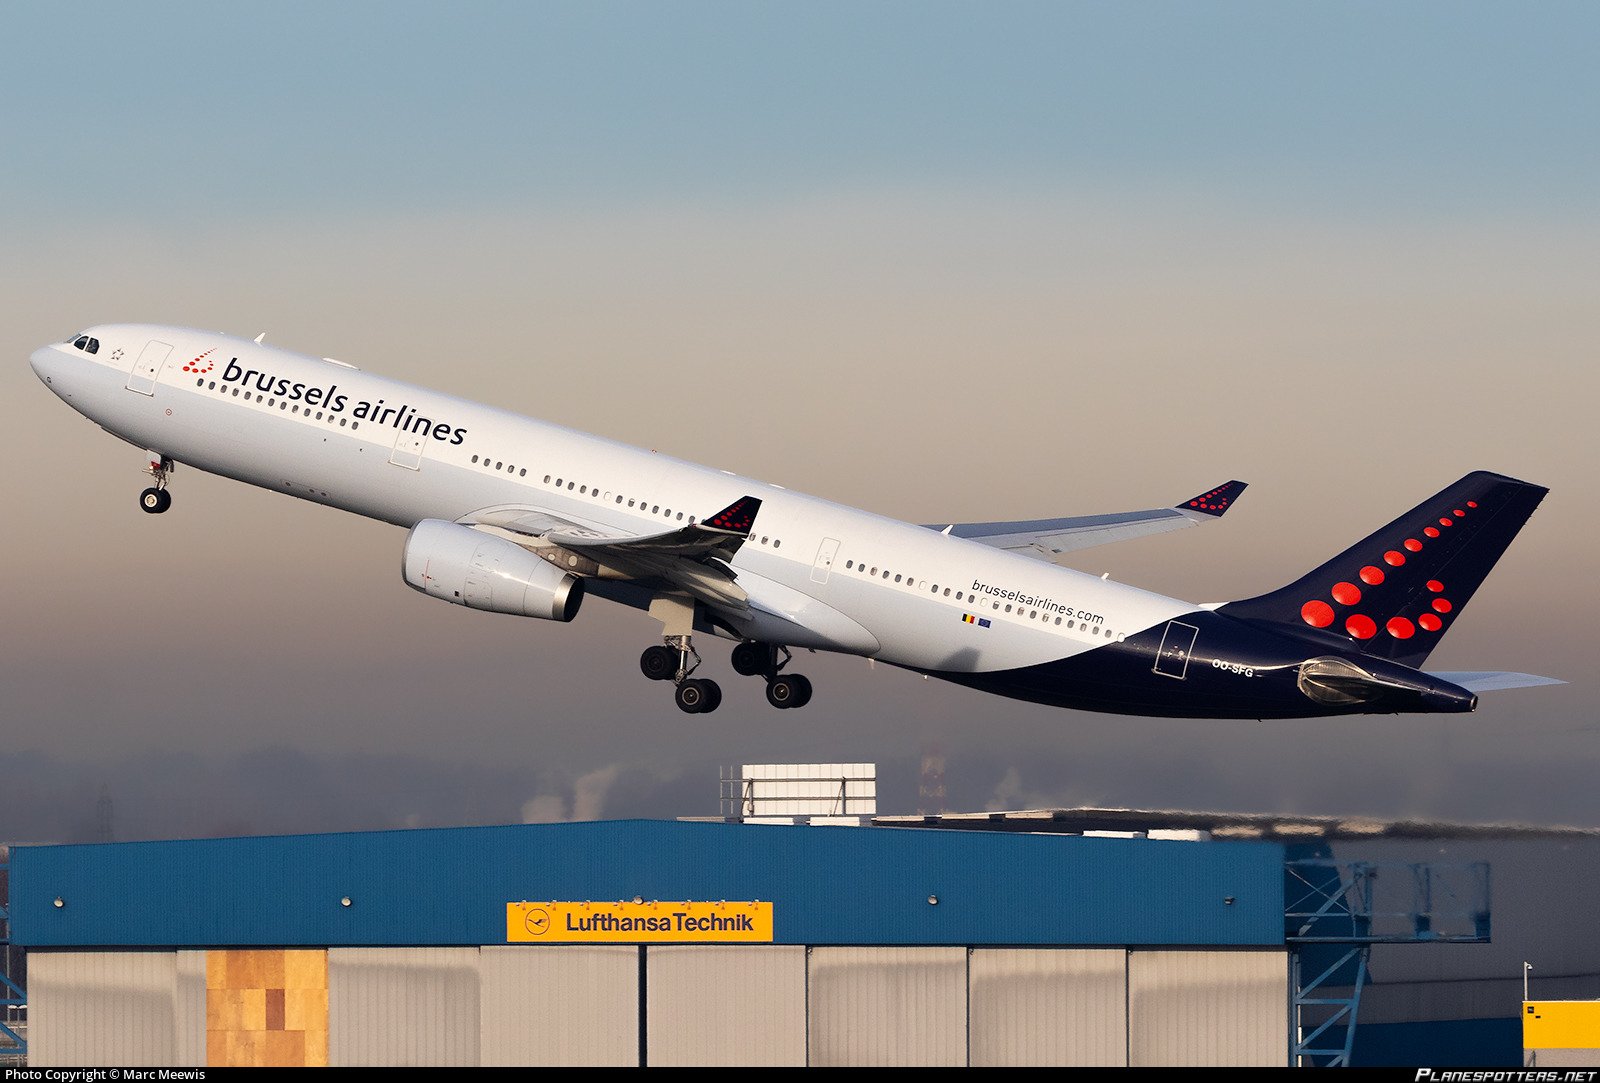 Brussels Airlines three-day cabin crew strike Feb 28 - Mar 1st